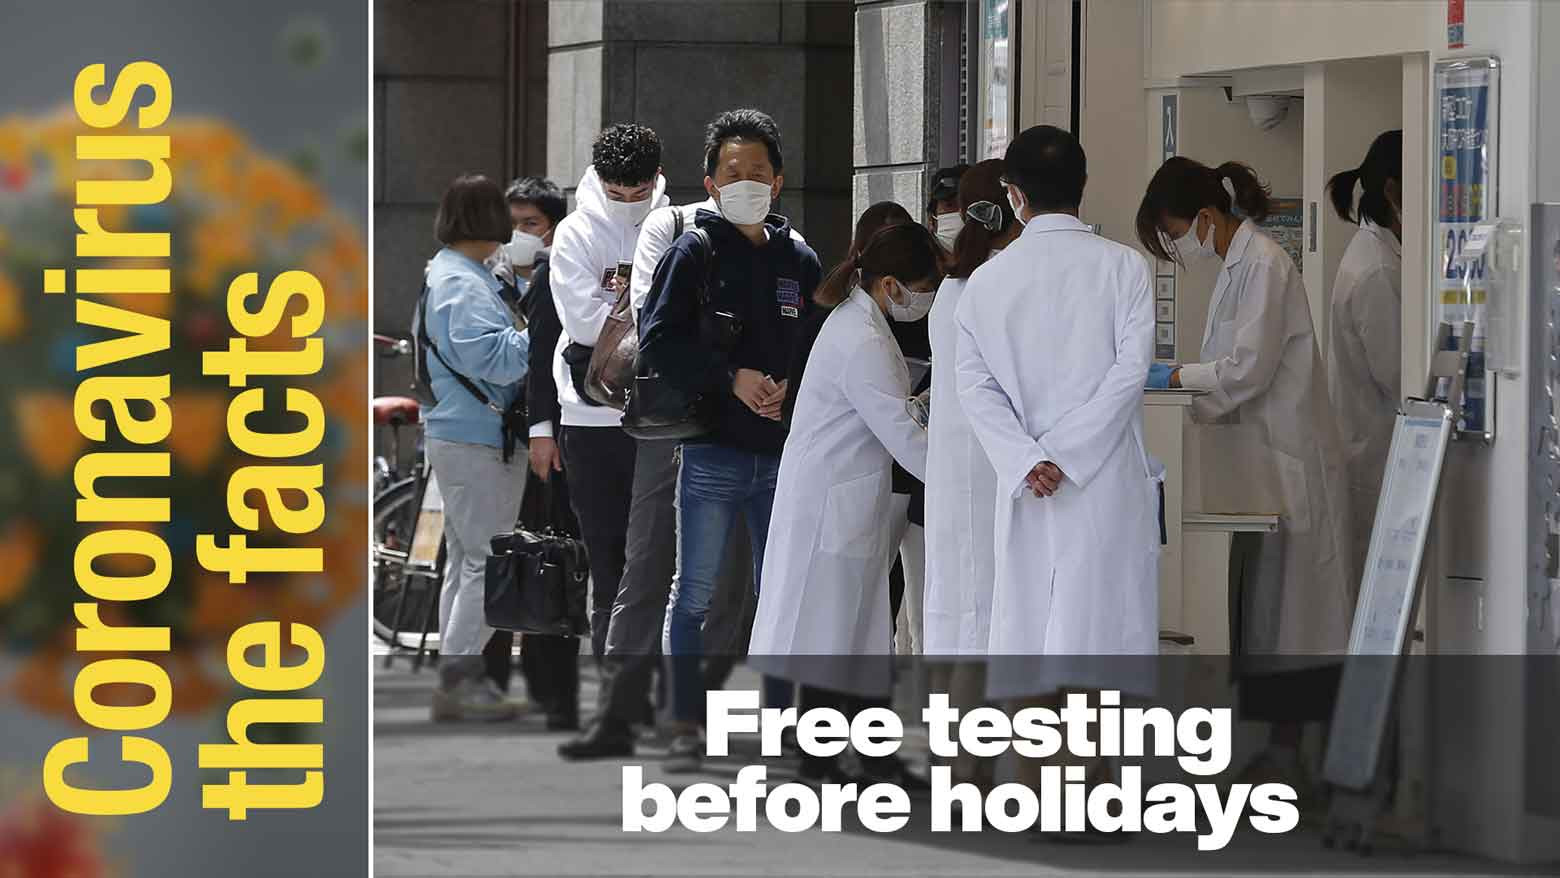 Government calls on people to get tested before spring holidays